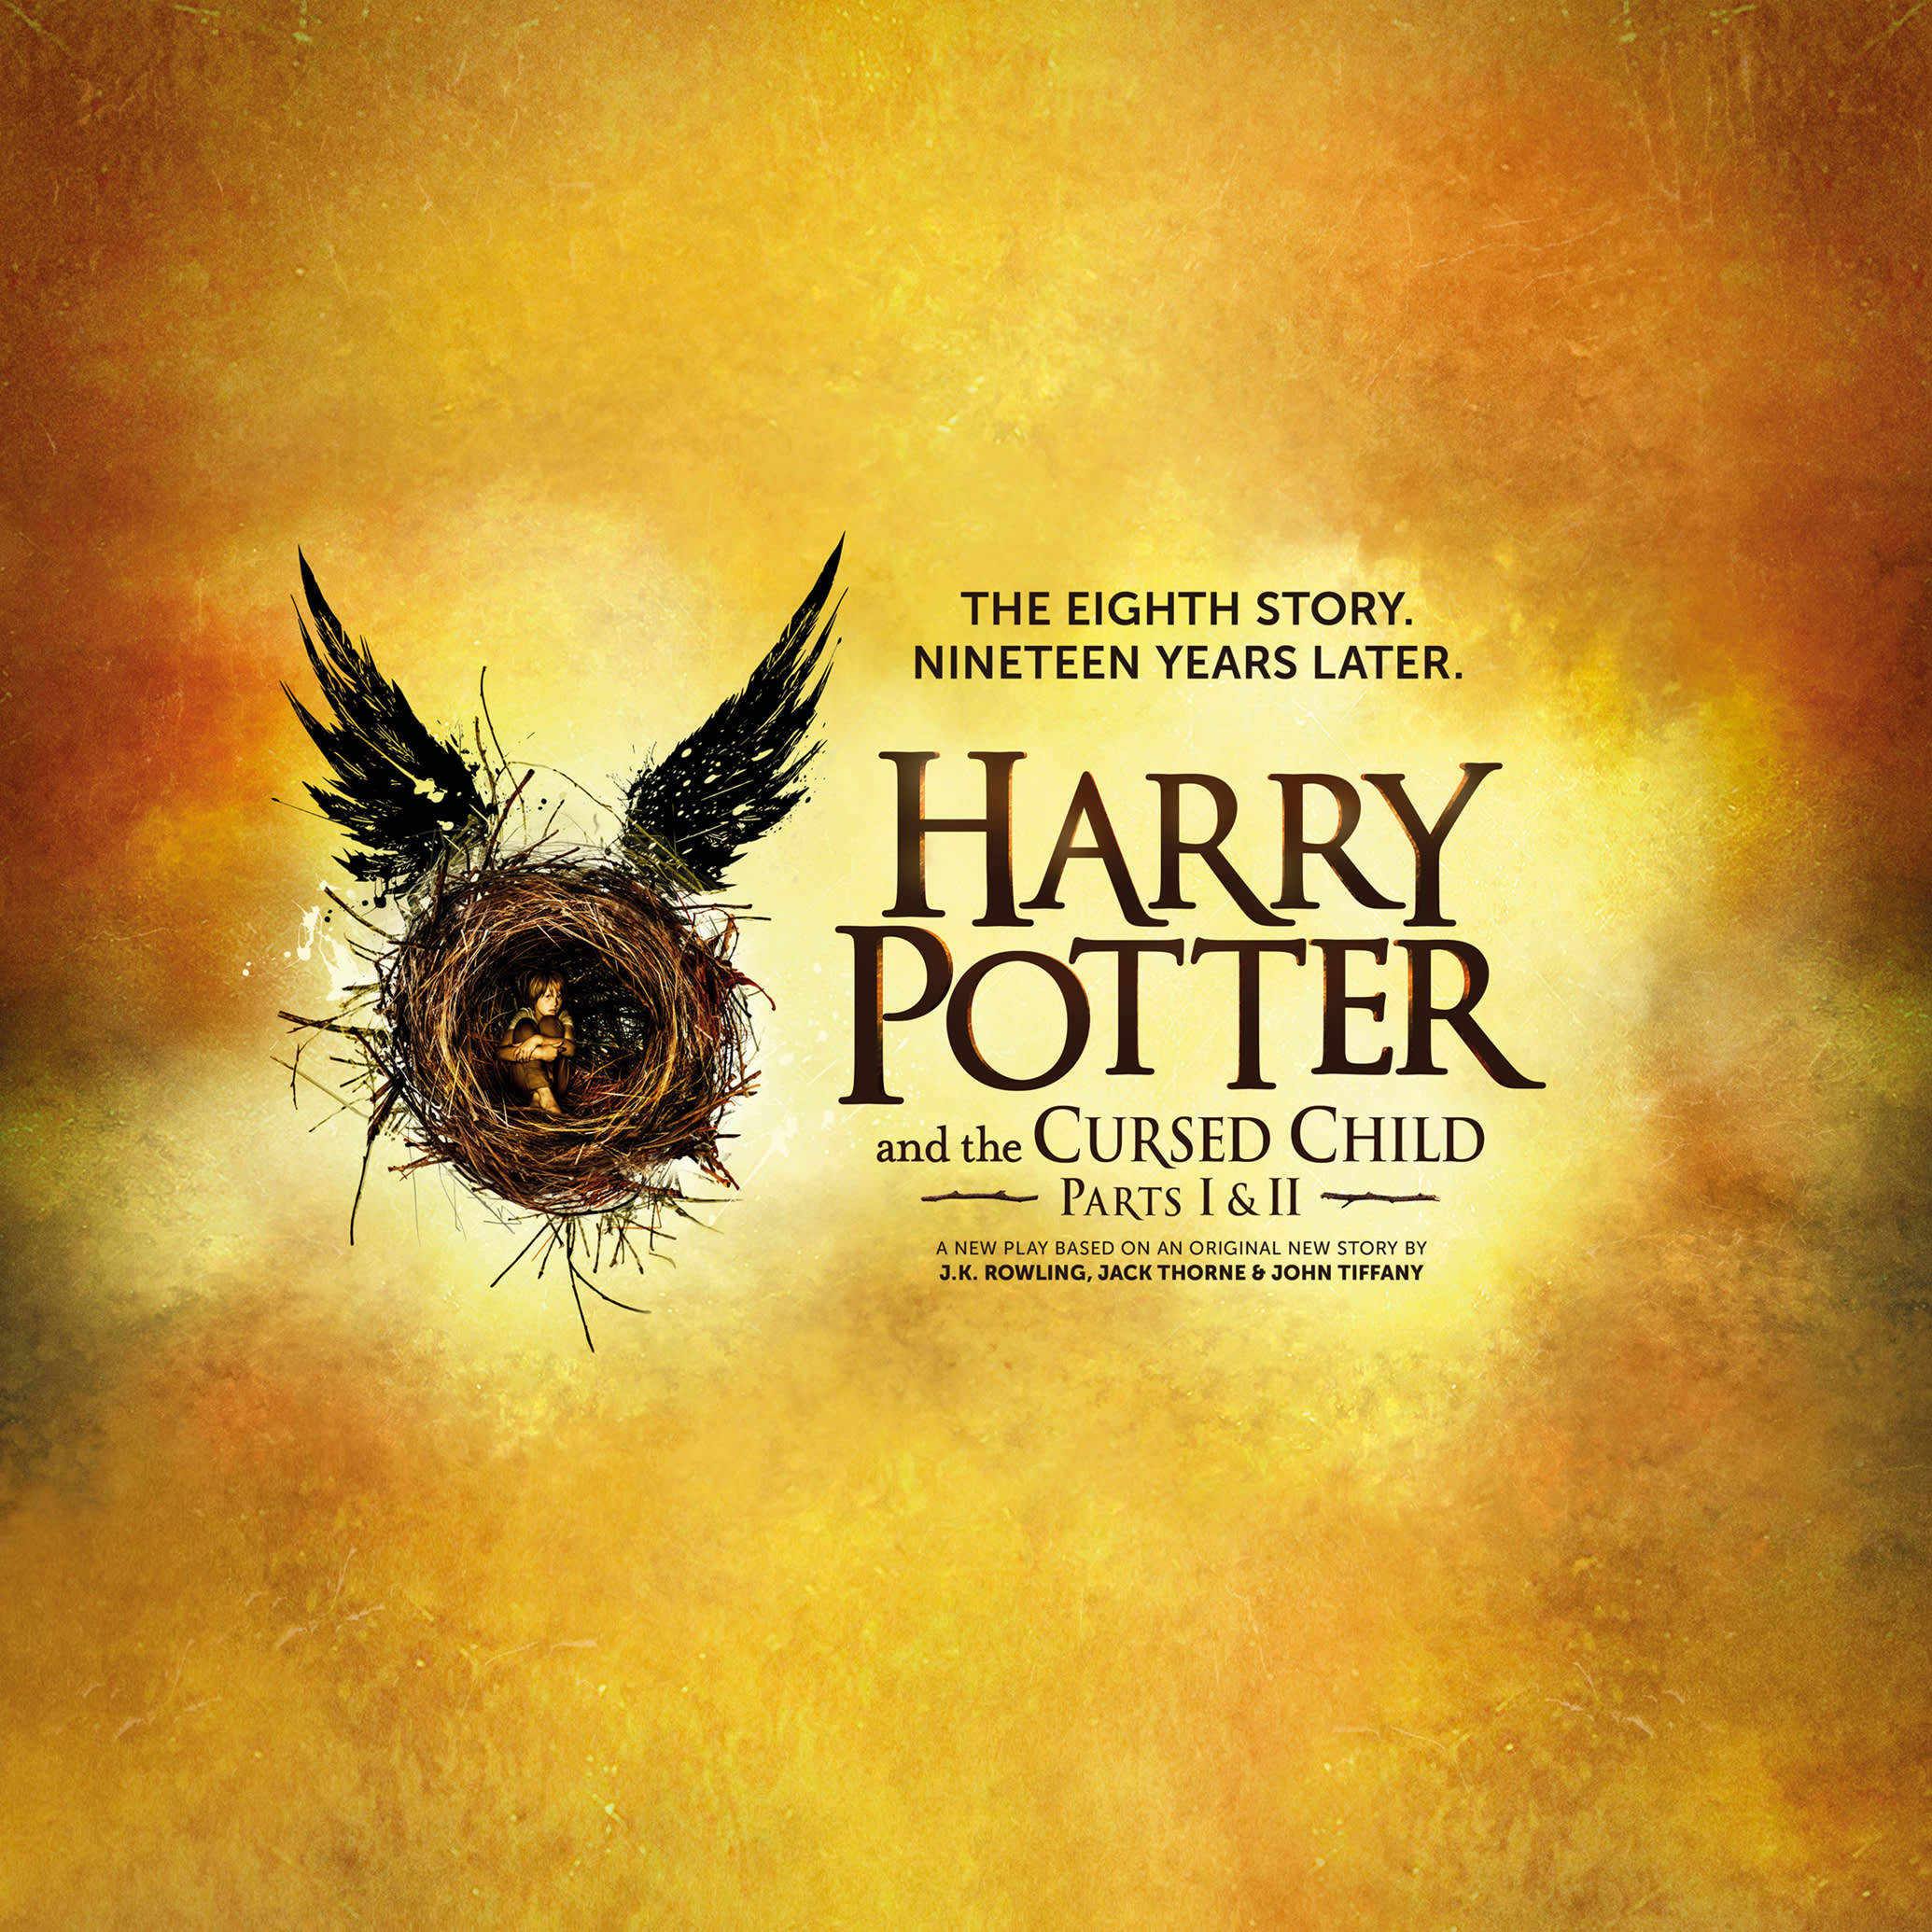 Harry Potter and the Cursed Child Poster FULL square